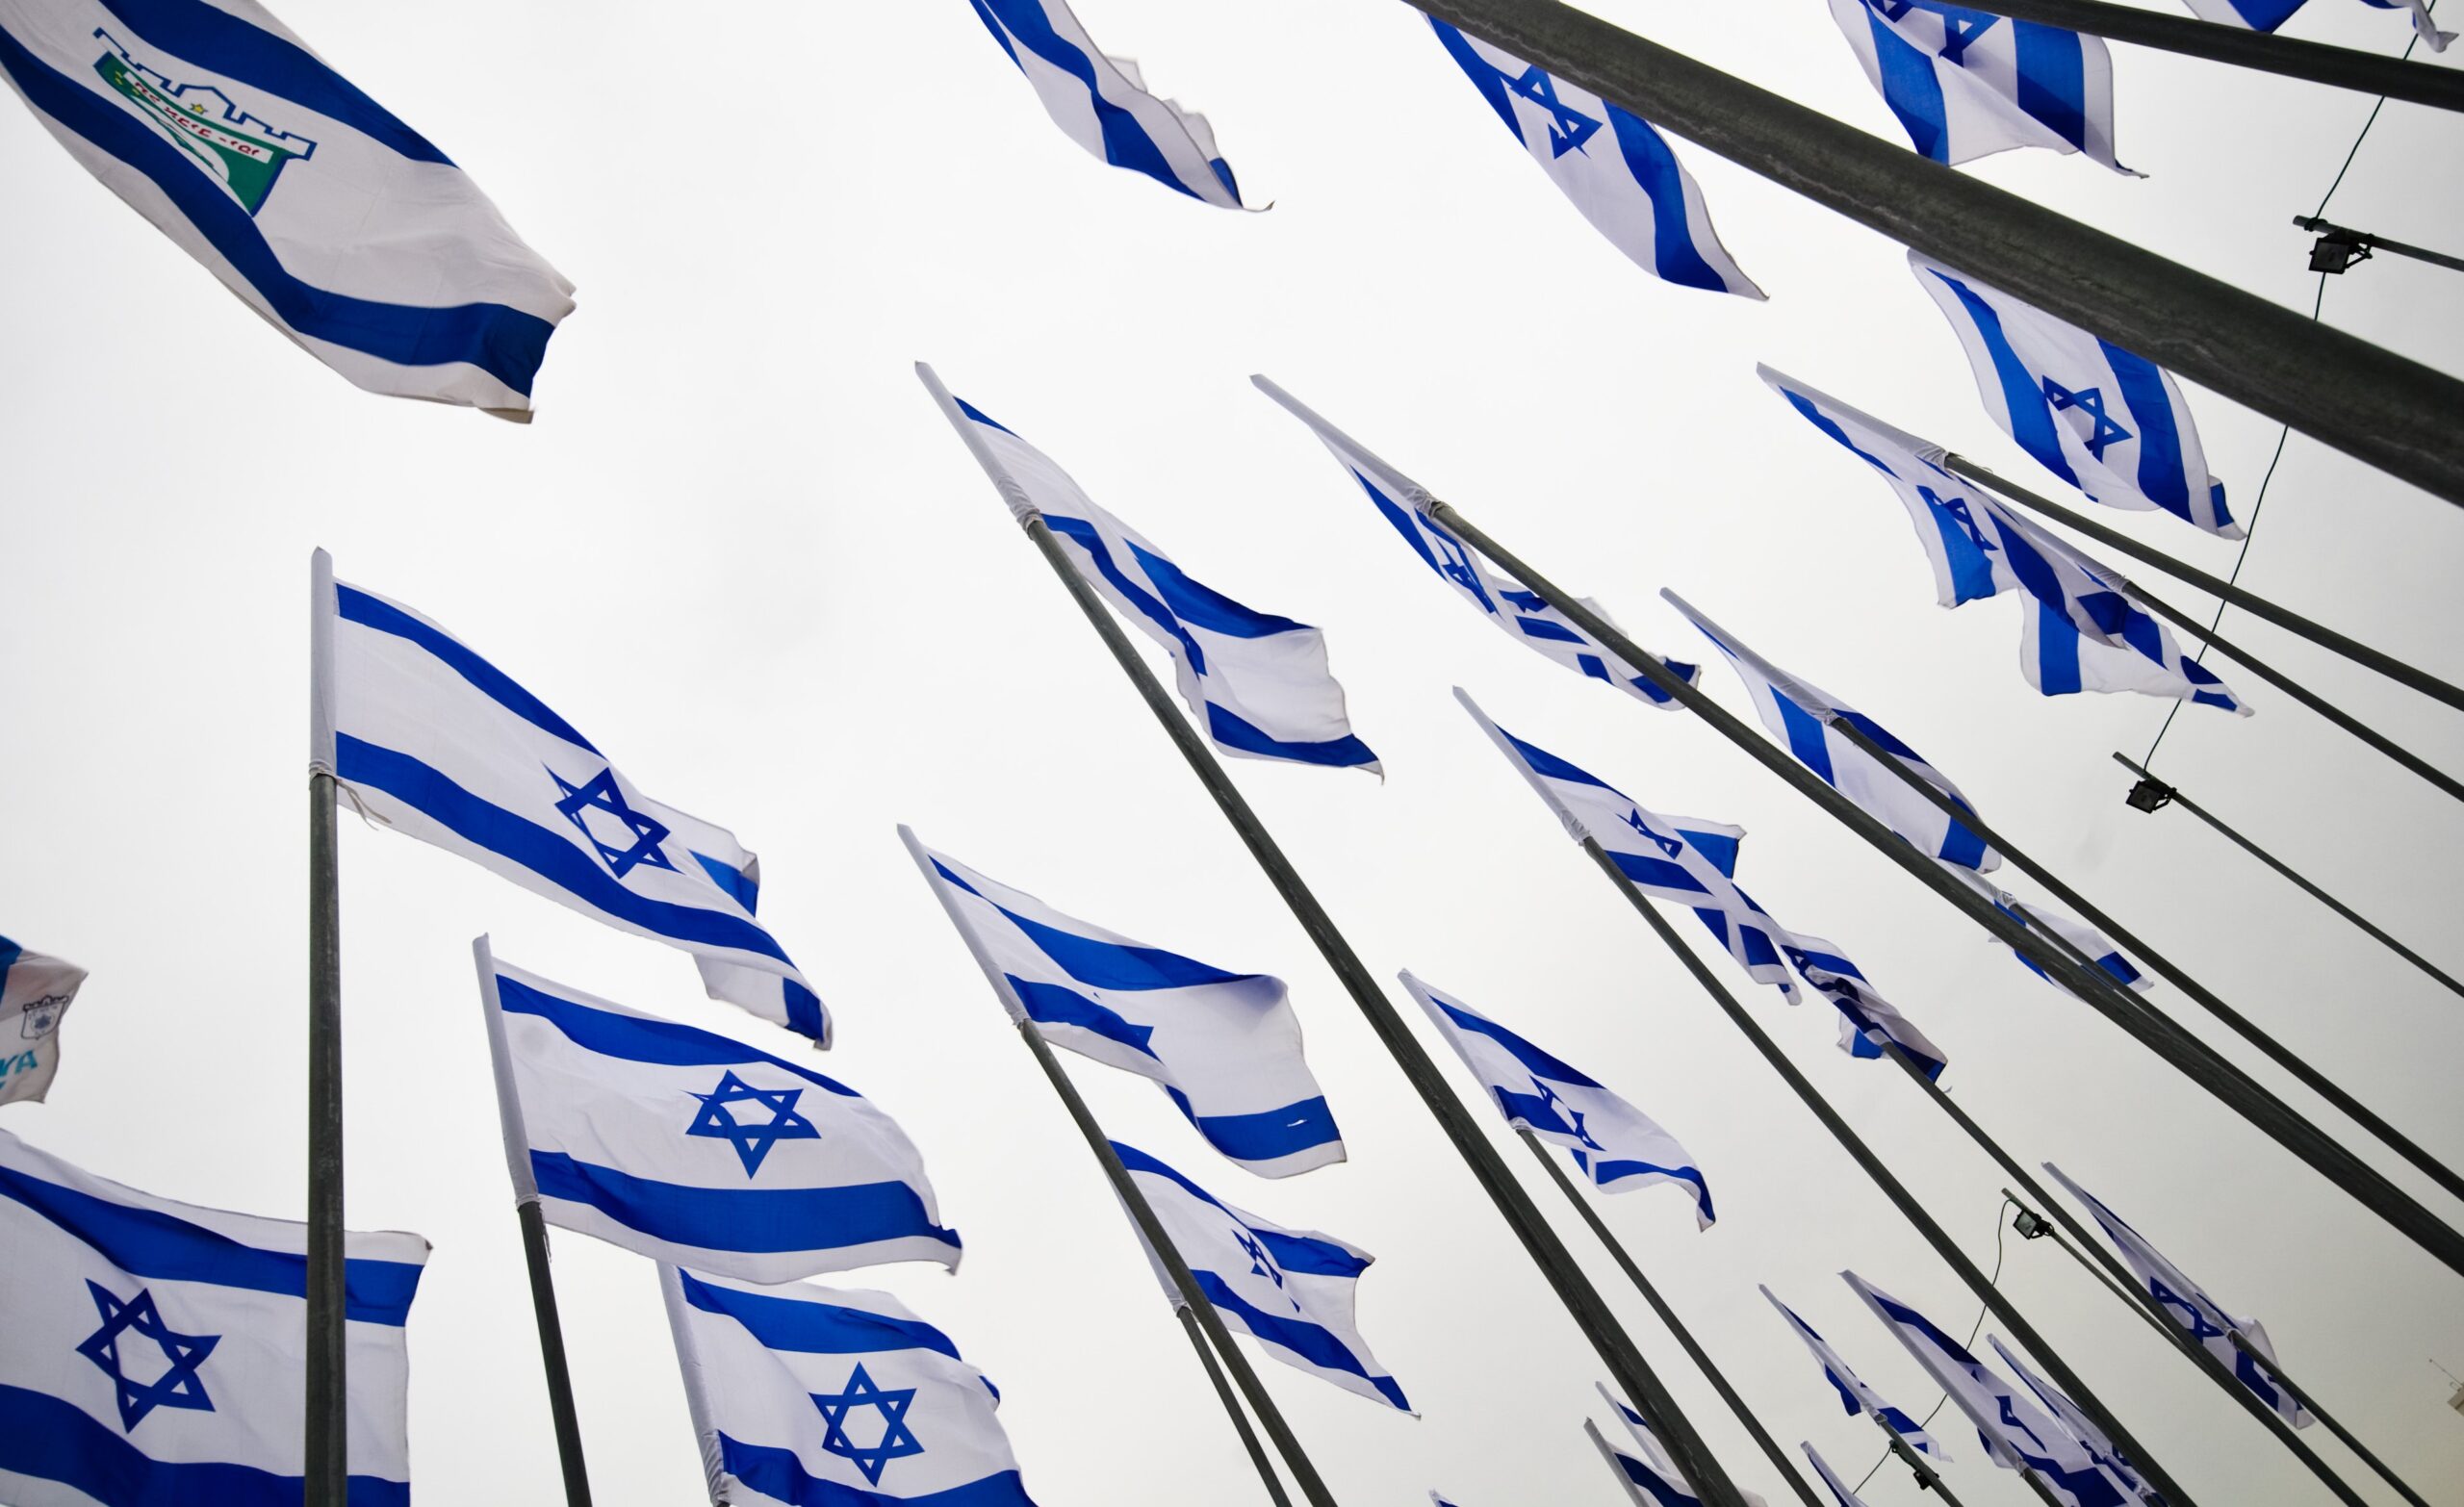 Israeli flags flutter in the wind in celebration of the country's 65th anniversary. (Shutterstock.com)